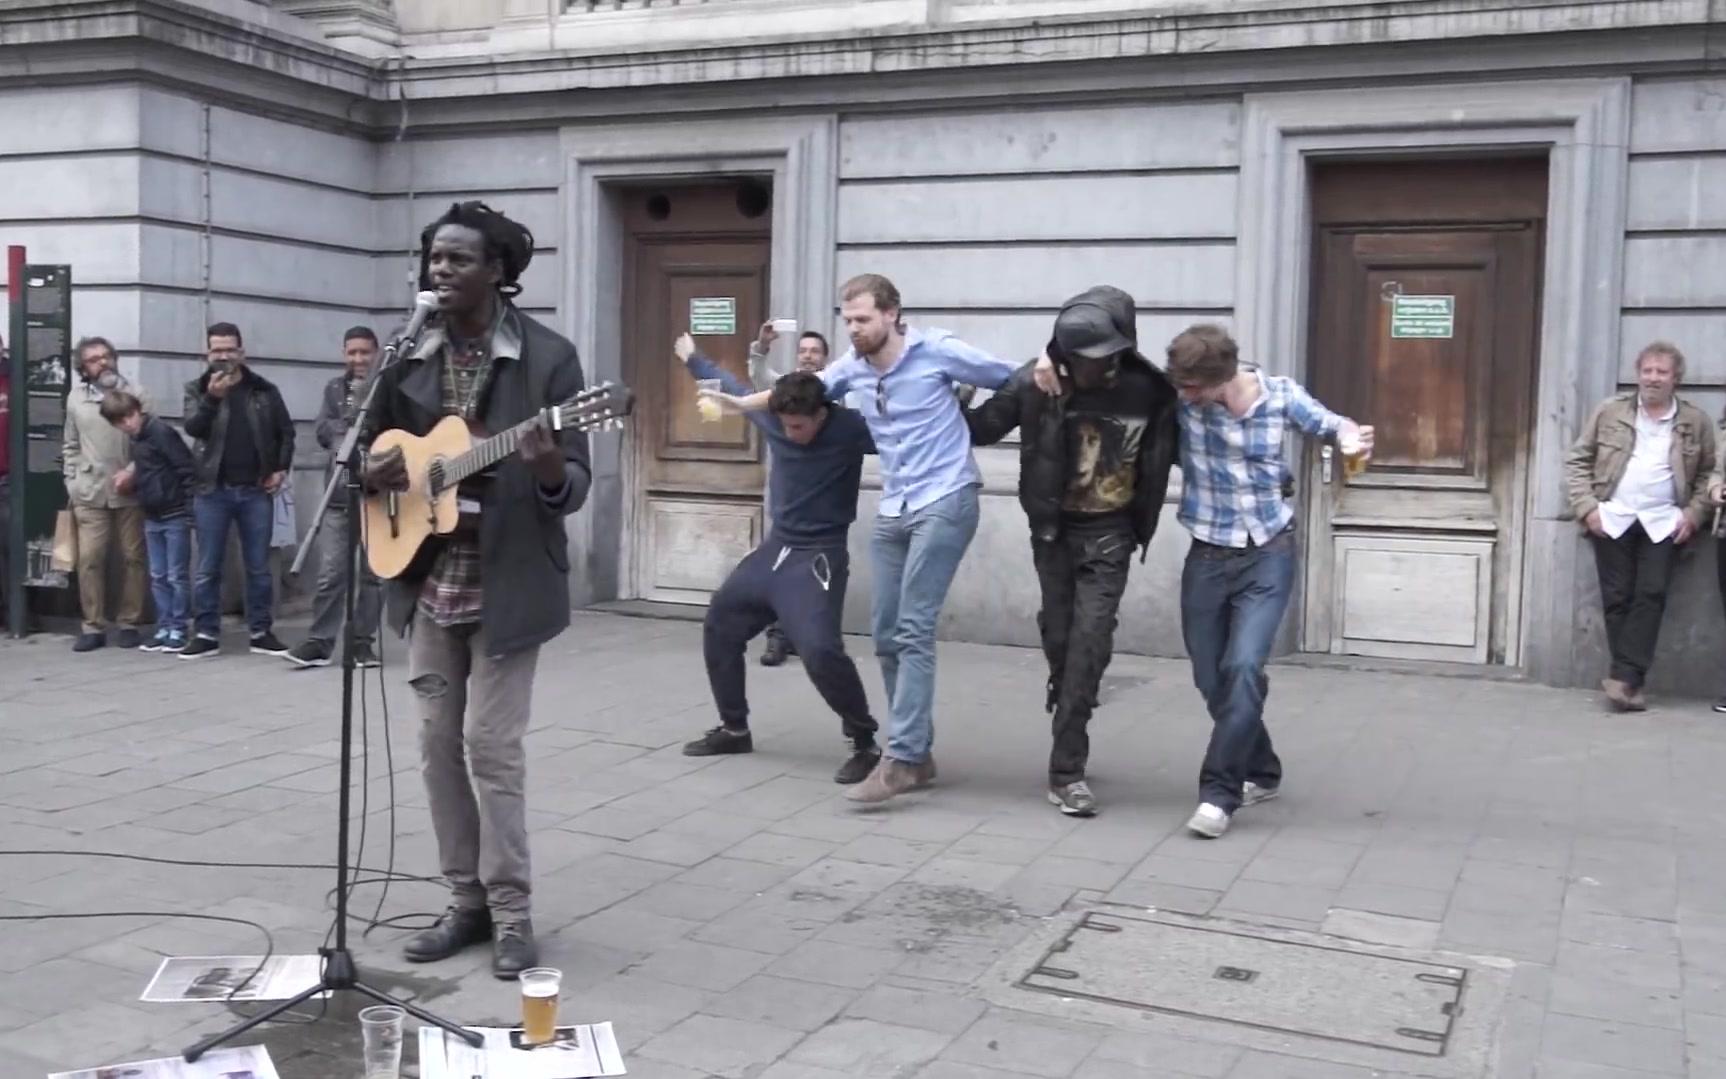 No_Woman__No_Cry__[cover]_Reggae_busker_(street_performance)